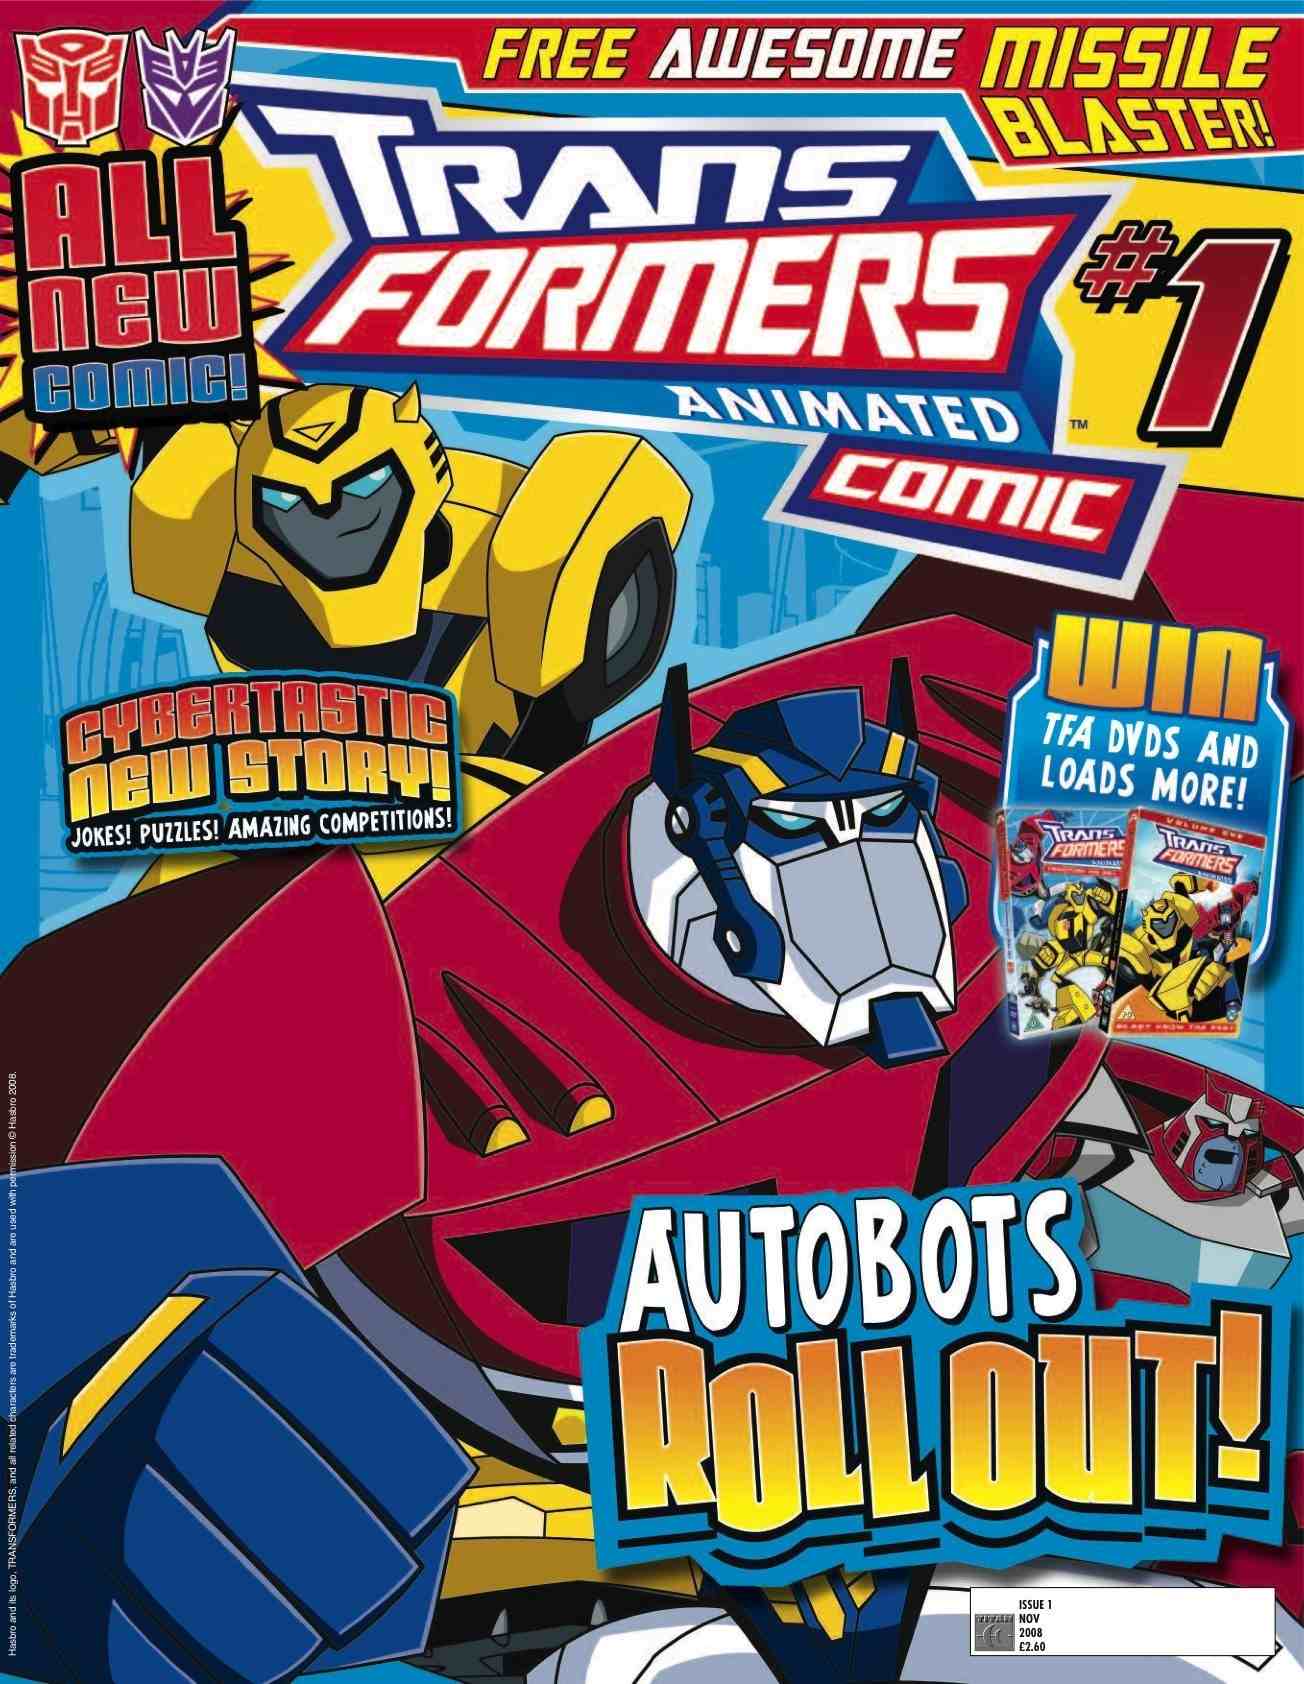 TRANSFORMERS Animated Comic' Cover #1 By Titan Comics